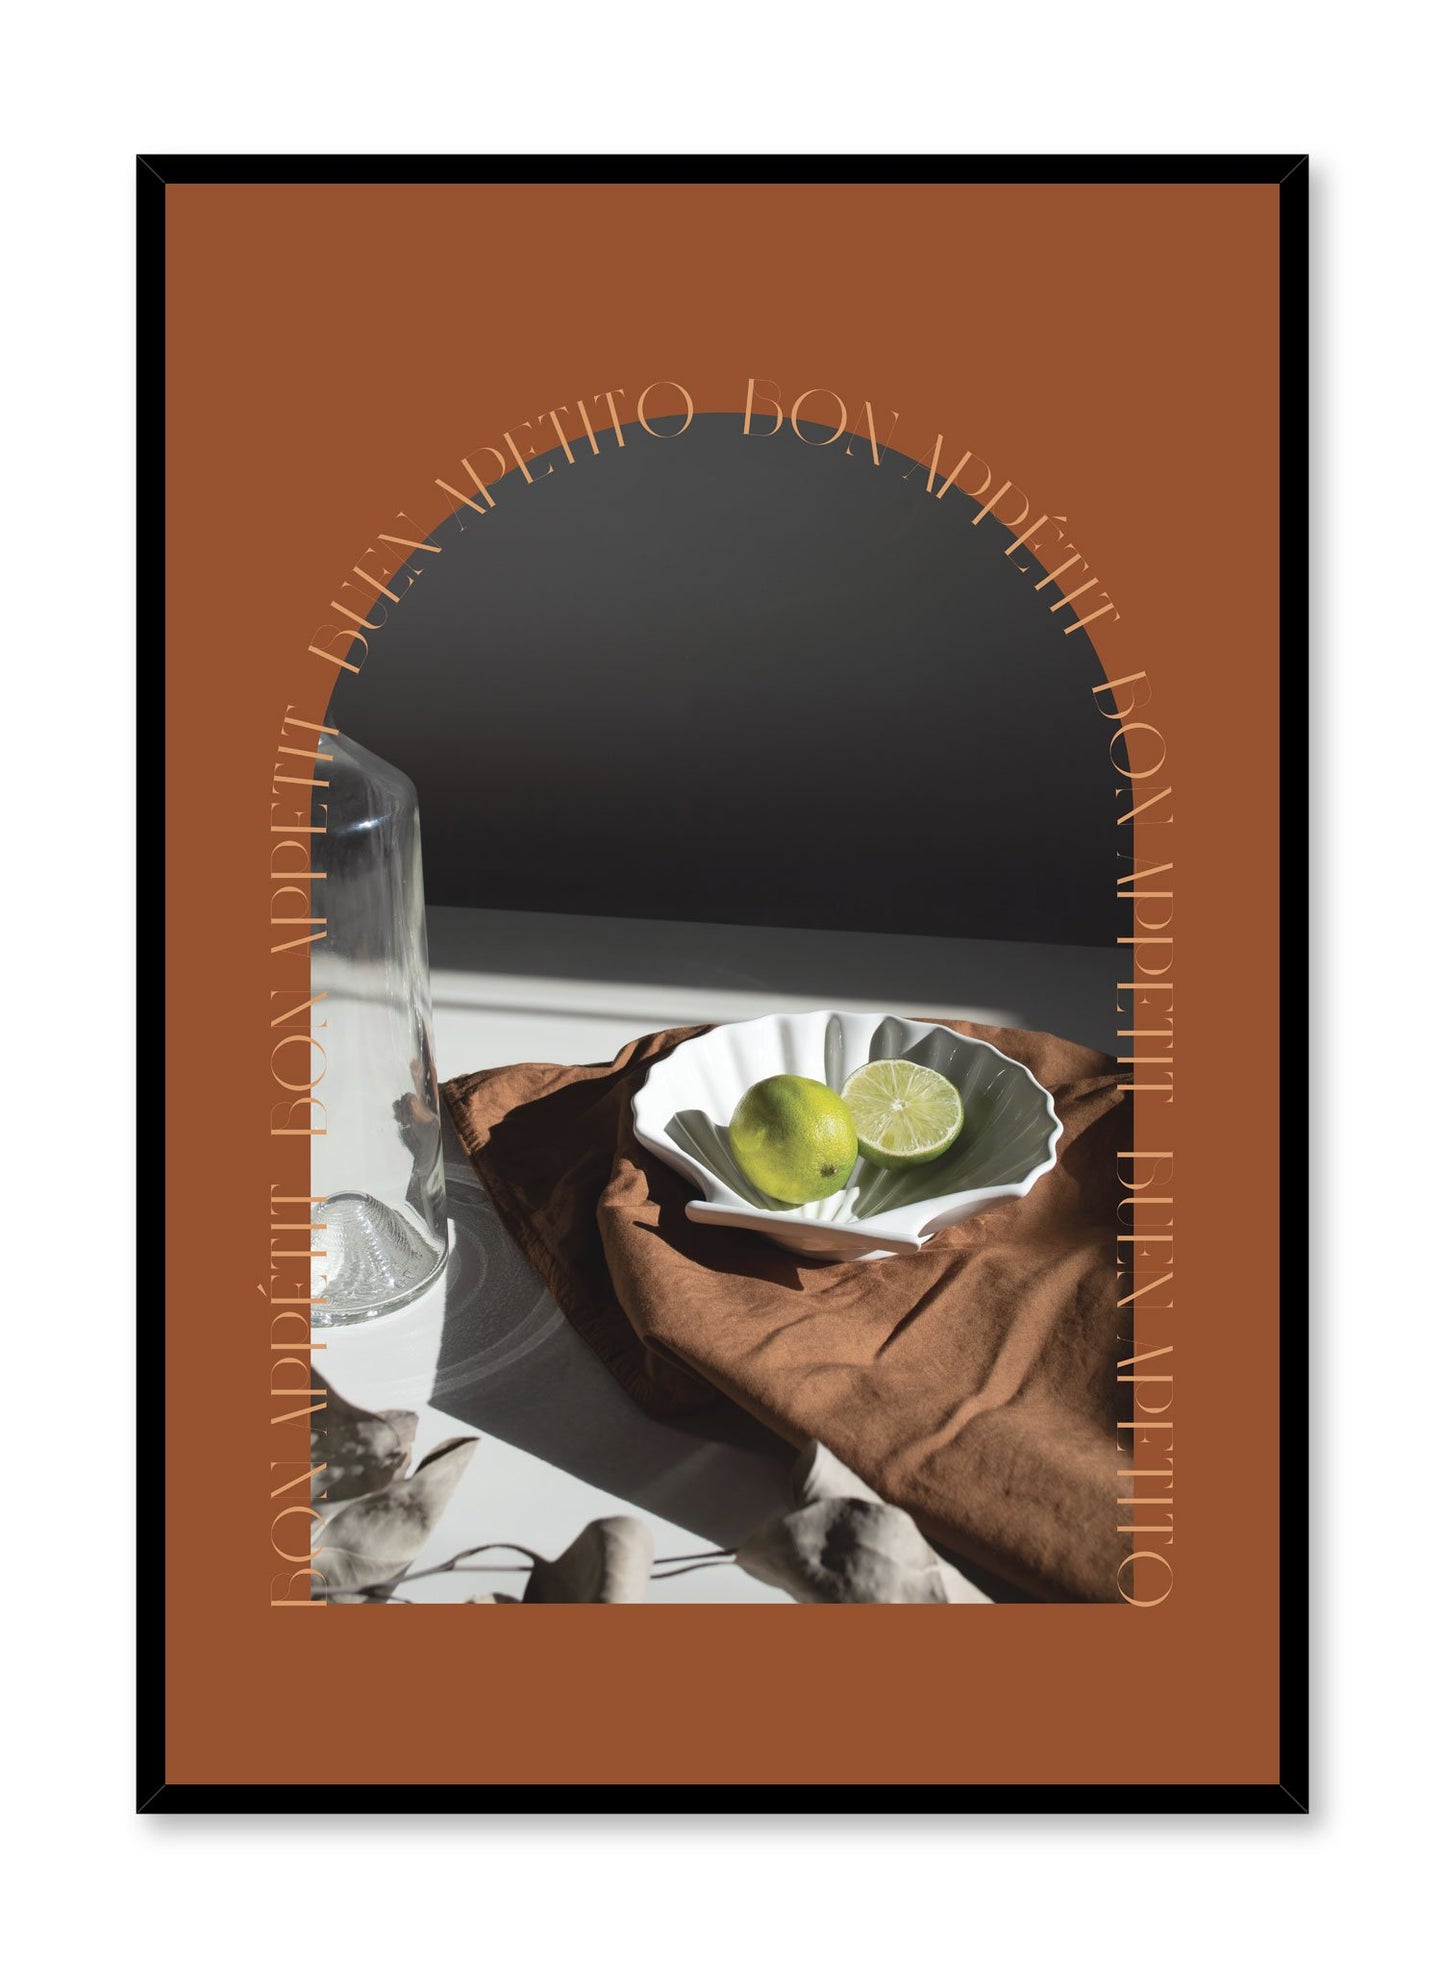 Cosmopolitan Feast is a still life fruit photography collage poster by Opposite Wall.